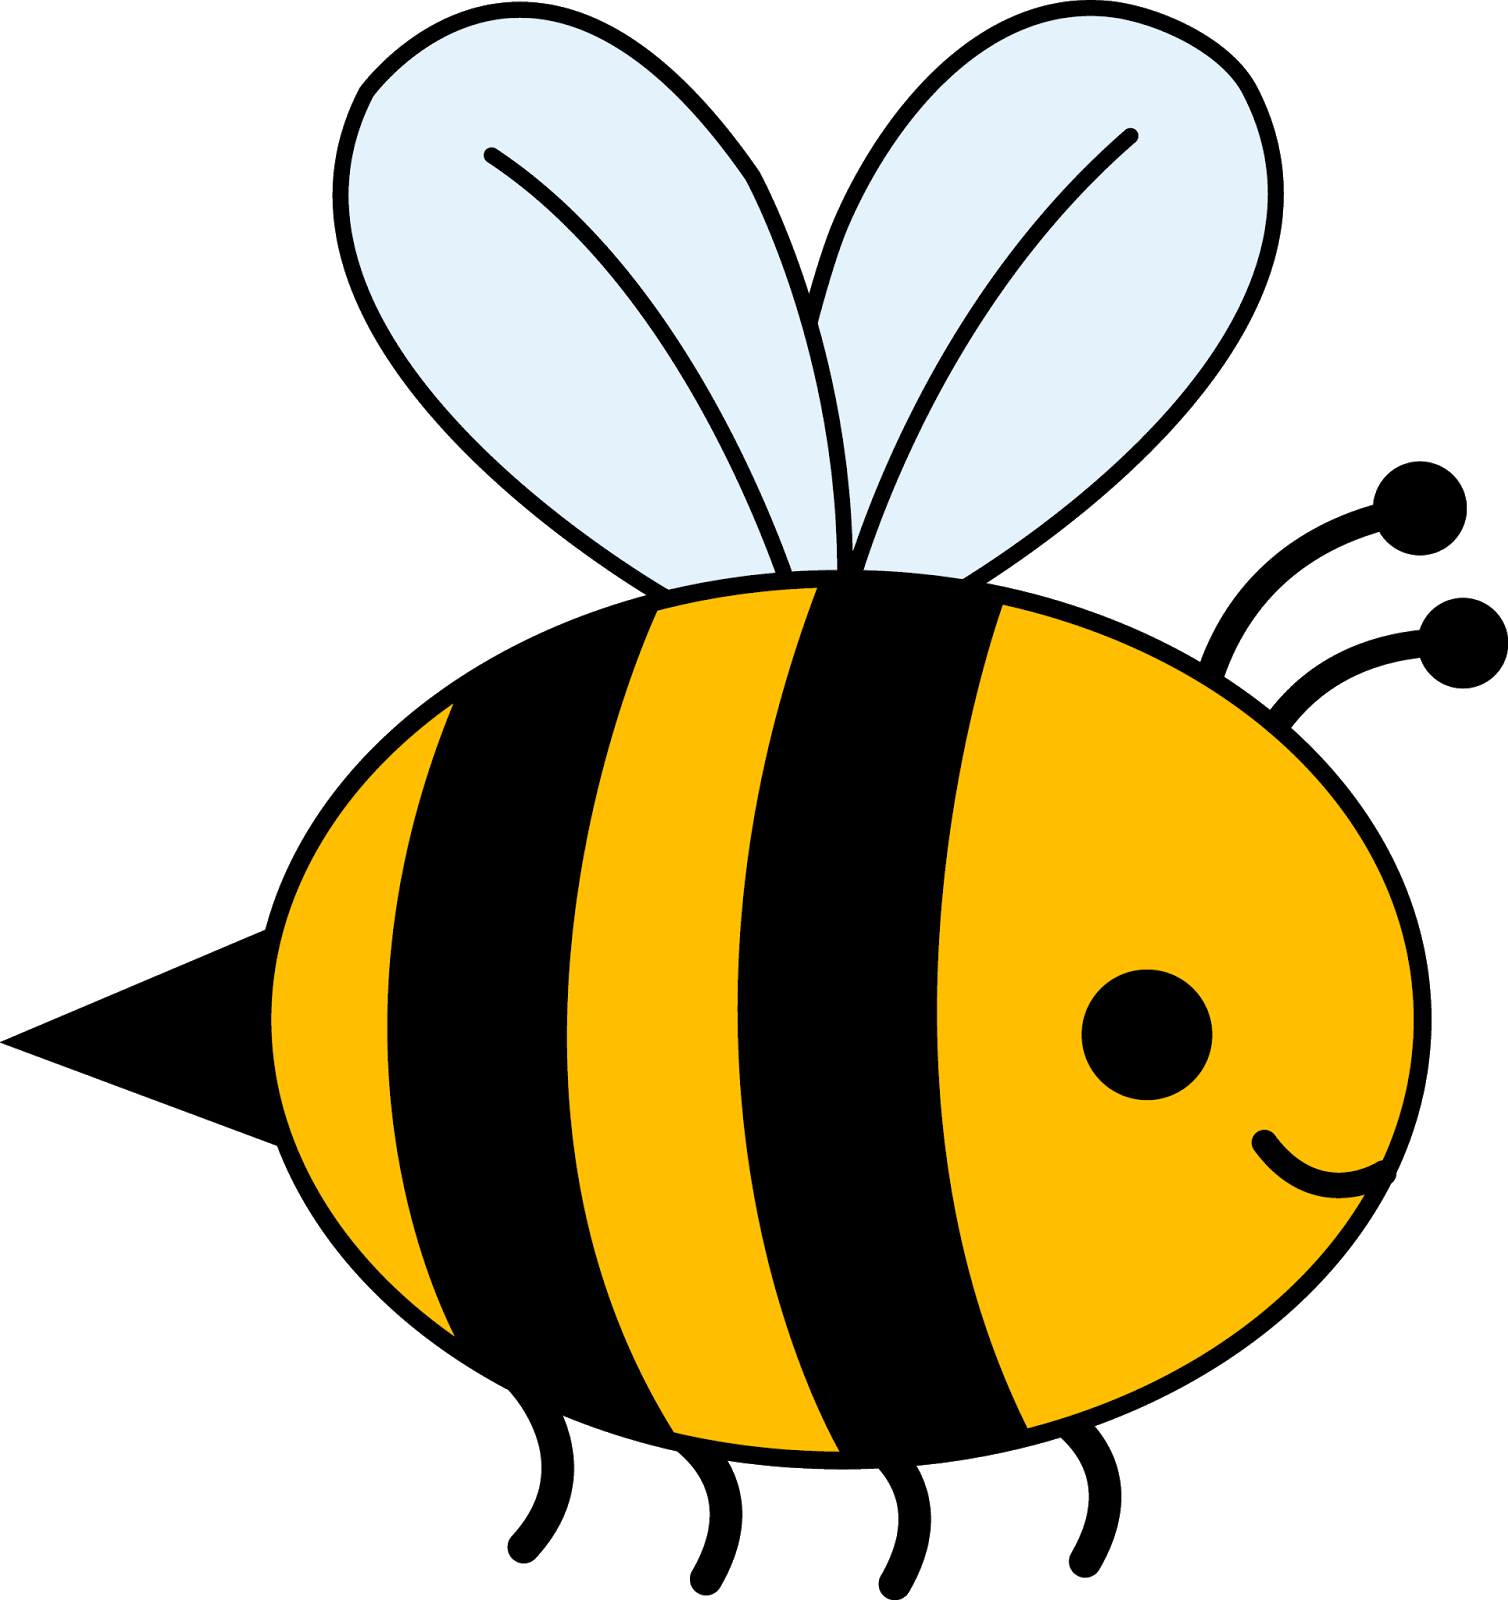 Spring bumble bee clipart.